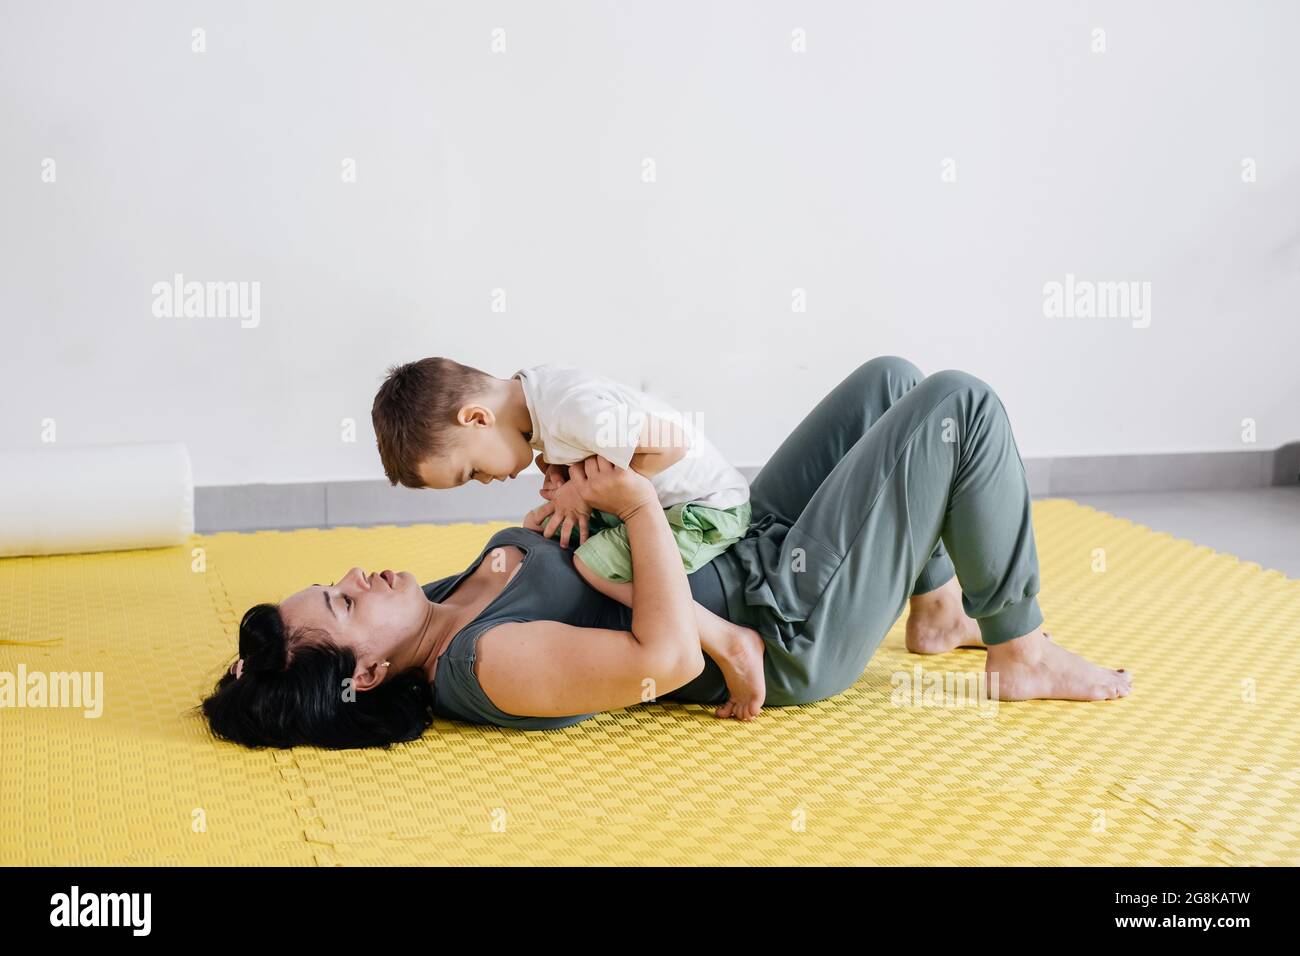 Rehabilitation of child with cerebral palsy in special center. Mother doing physical exercises and happily playing with boy, Sport activities for Stock Photo